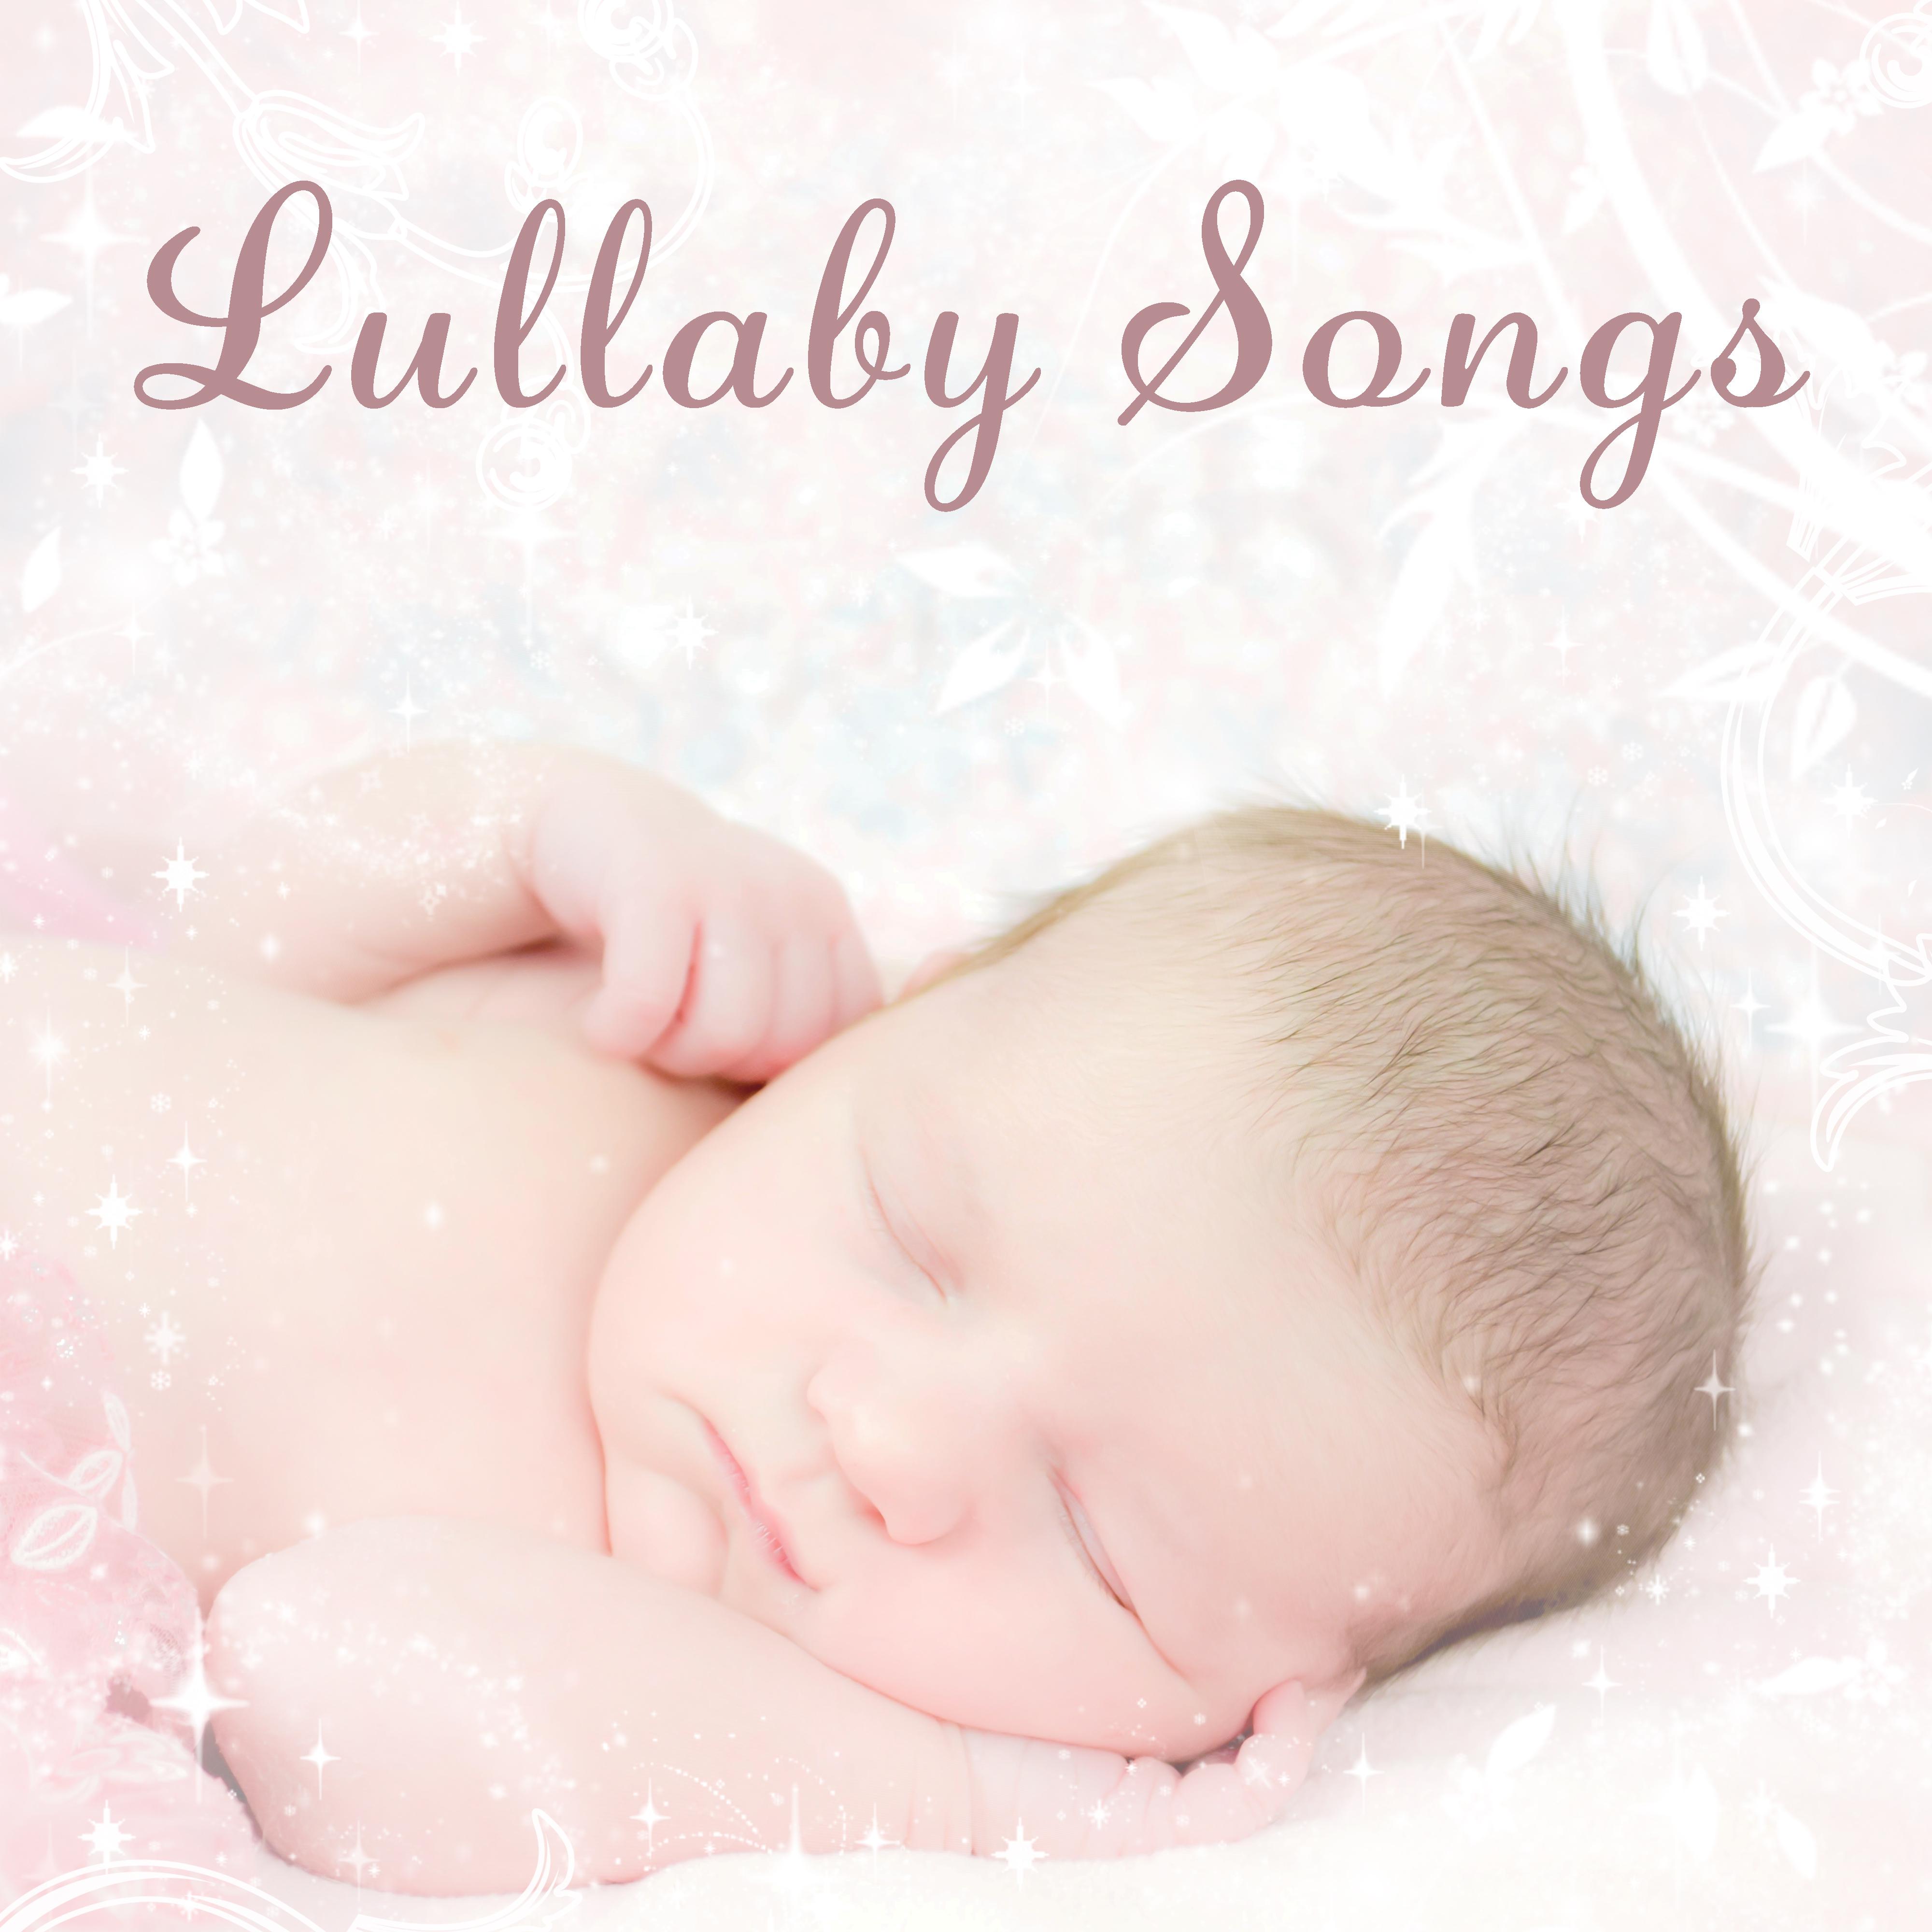 Lullaby Songs  Calming New Age Lullabies, Nature Sounds, Relaxing Music, White Noise, Sleep Music for Babies